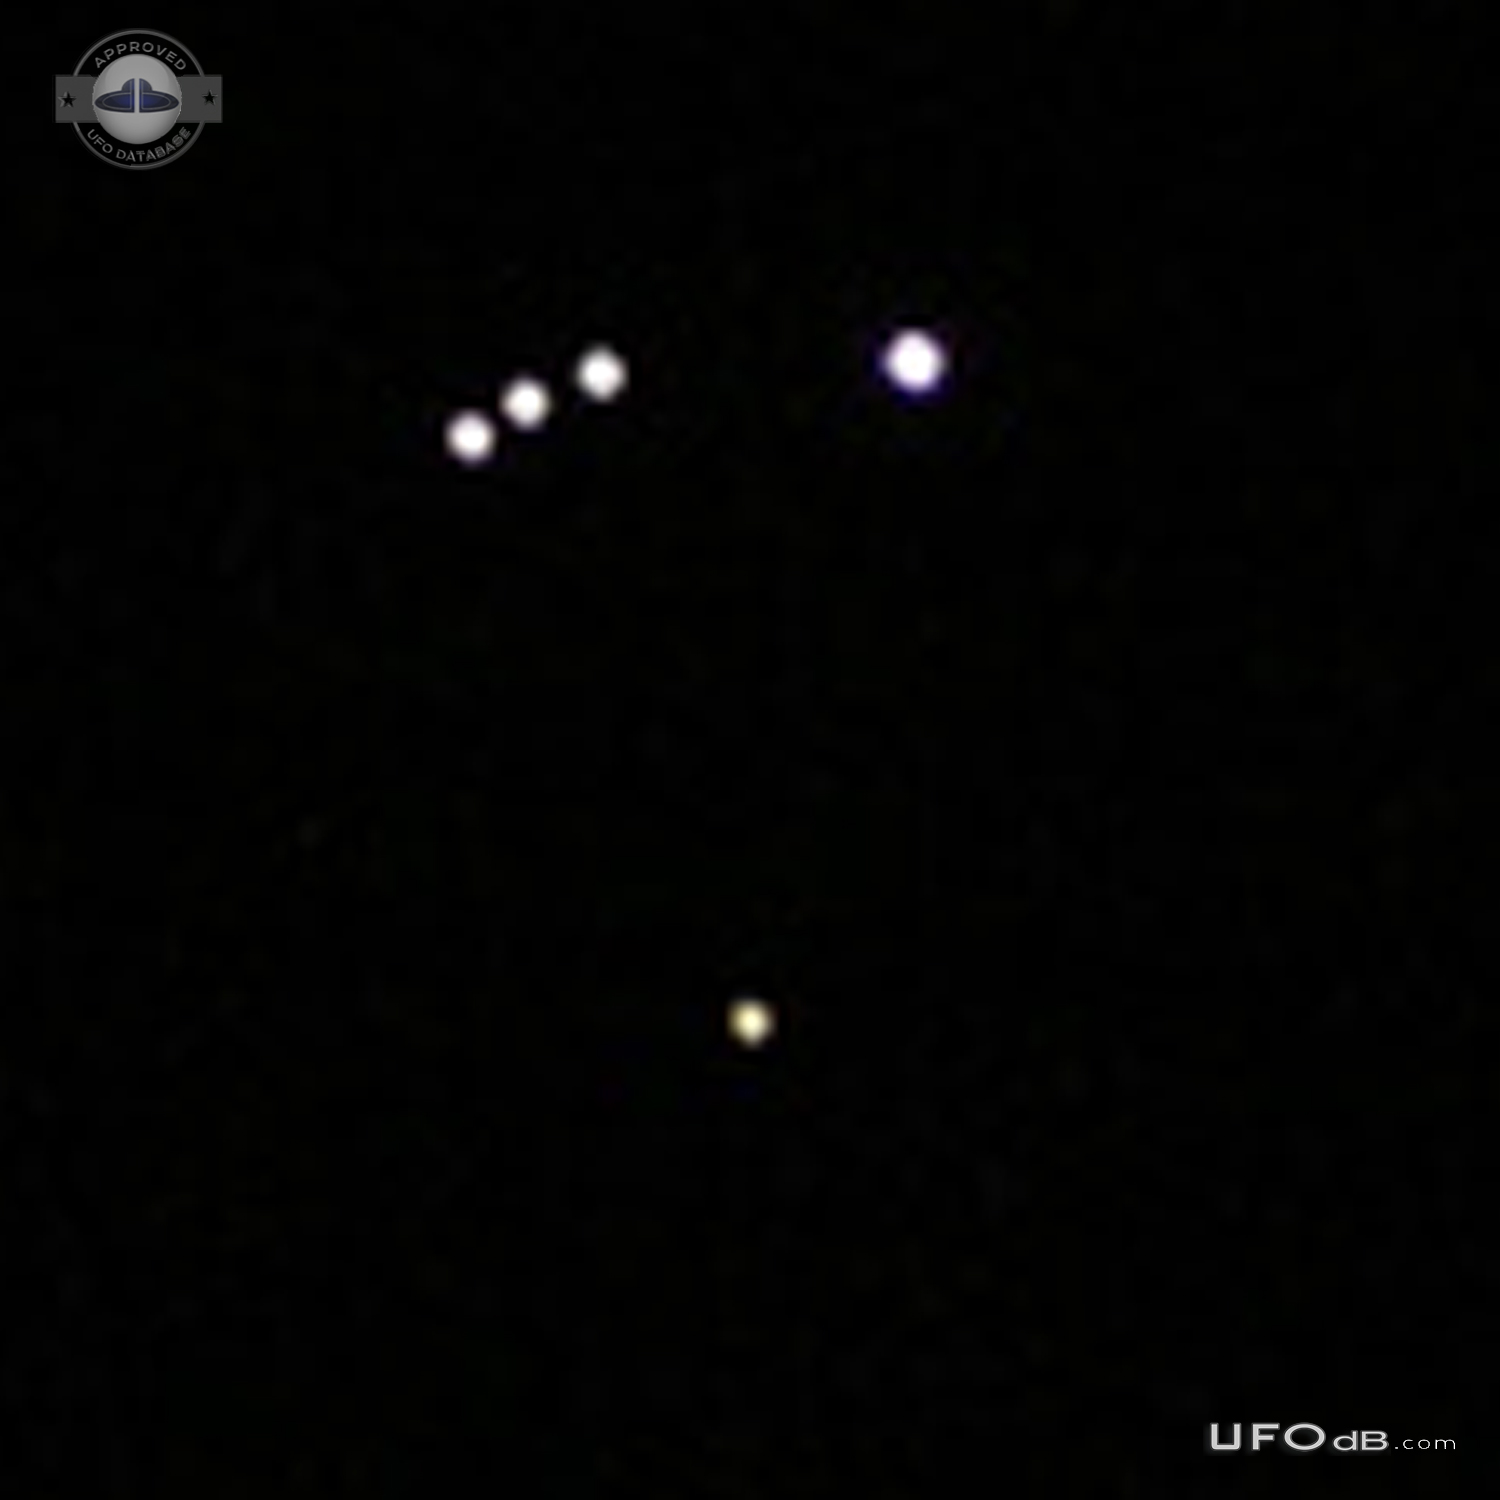 Multiple UFOs alternately flashing and circling each other in groups - UFO Picture #712-5